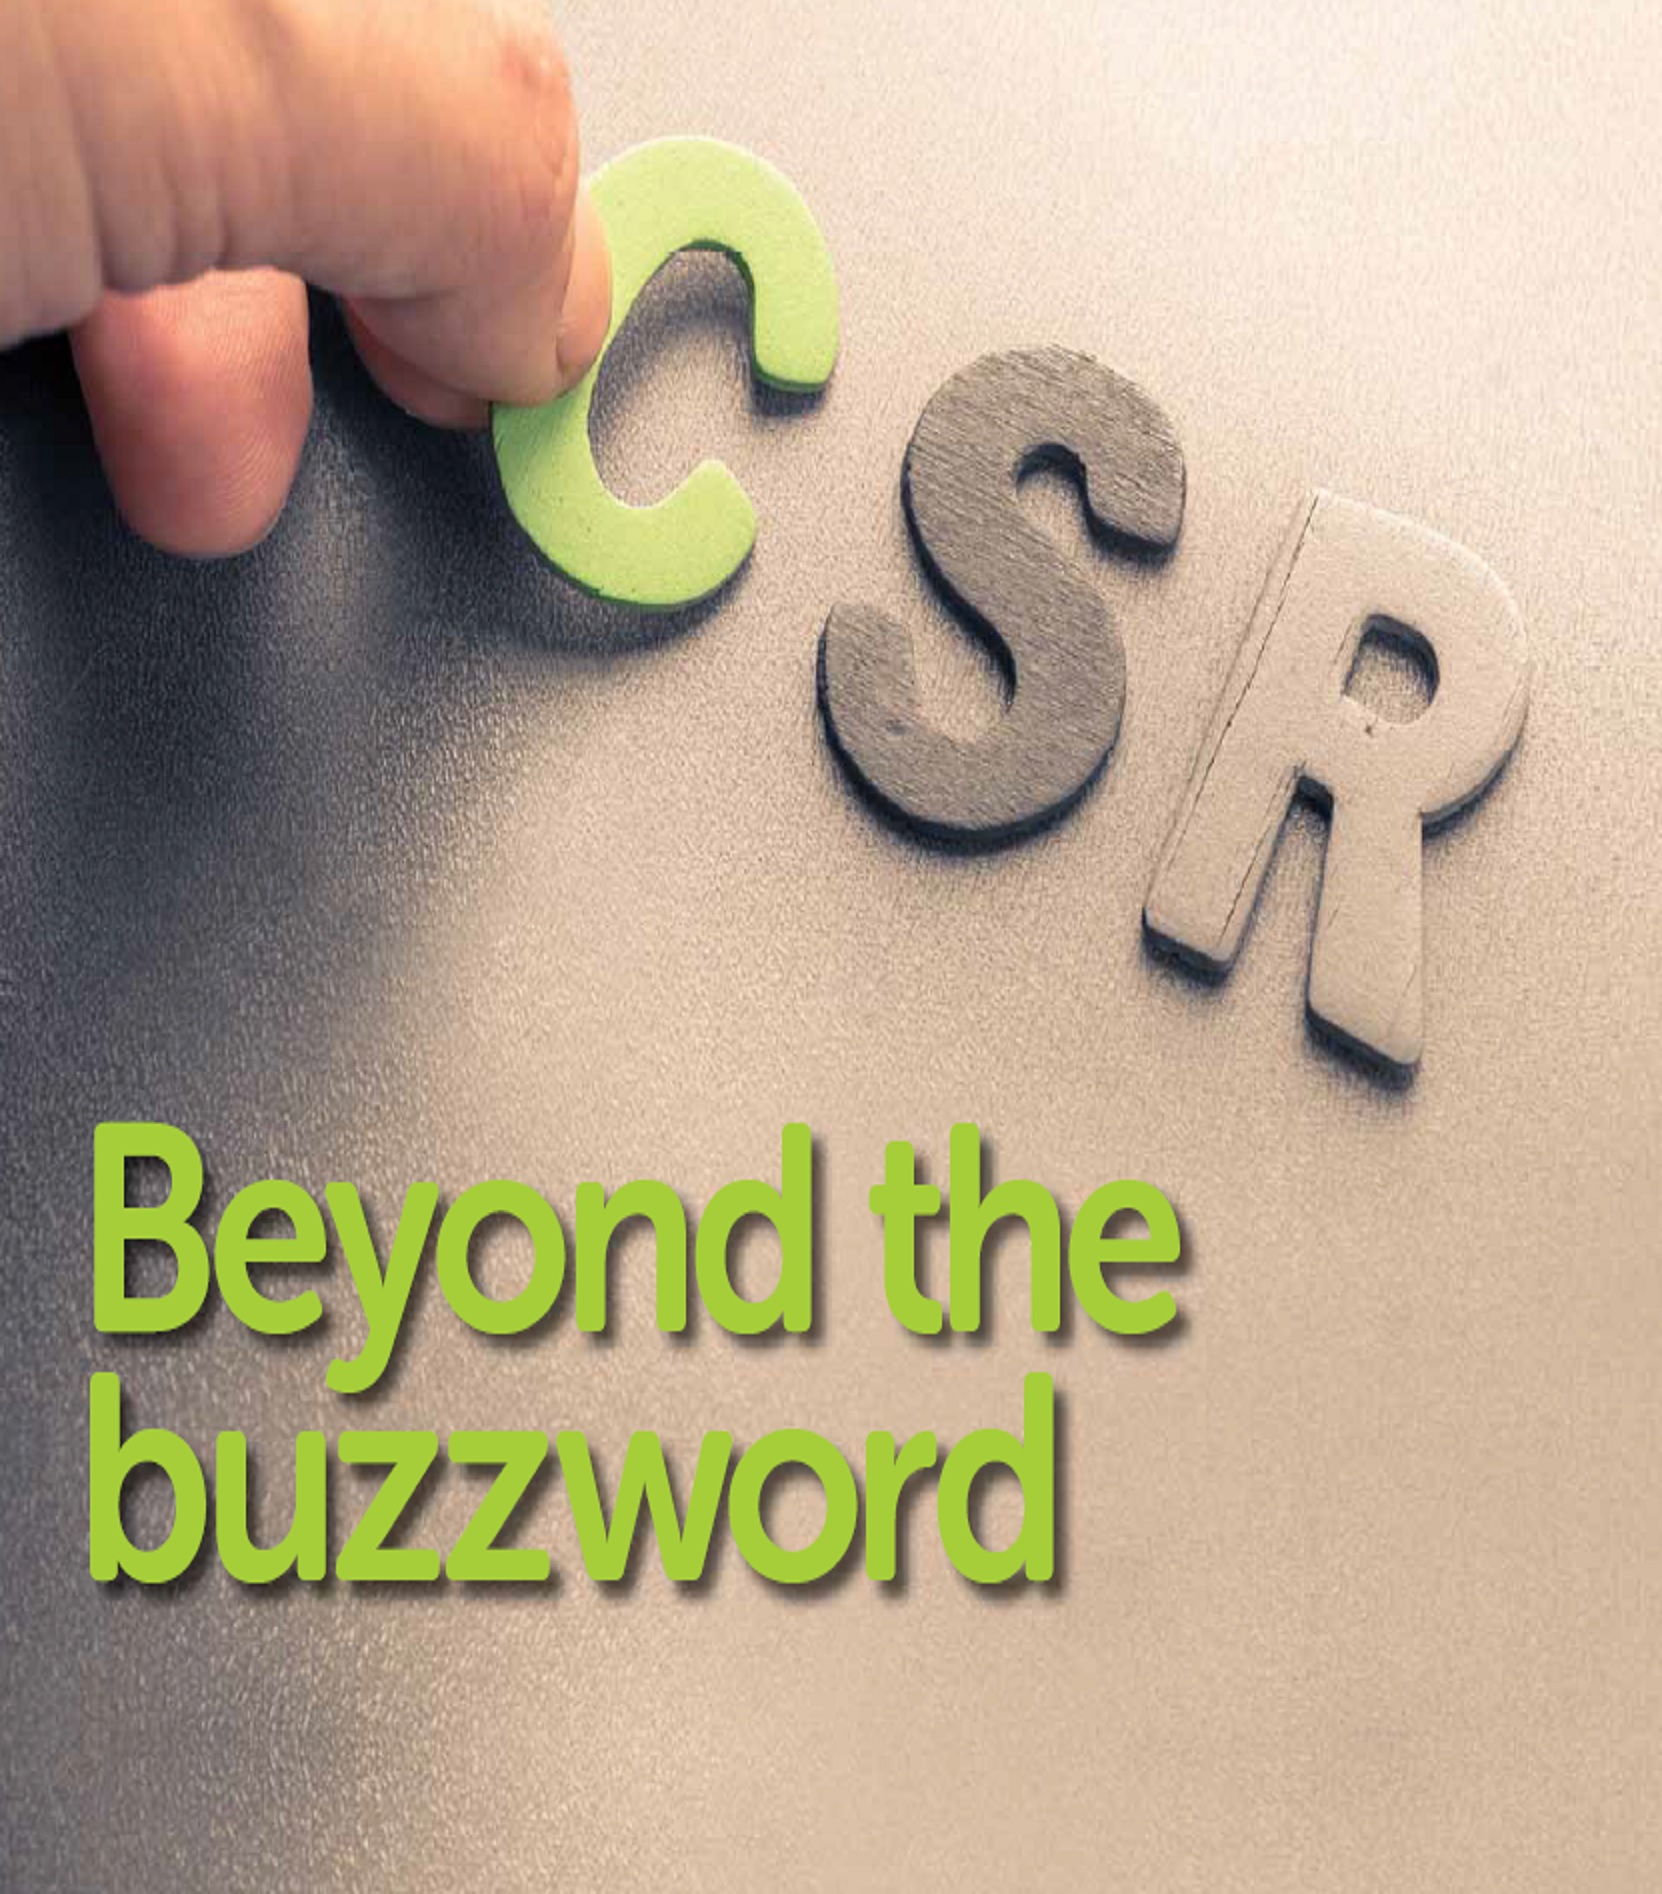 Corporate sustainability: Beyond the buzzword